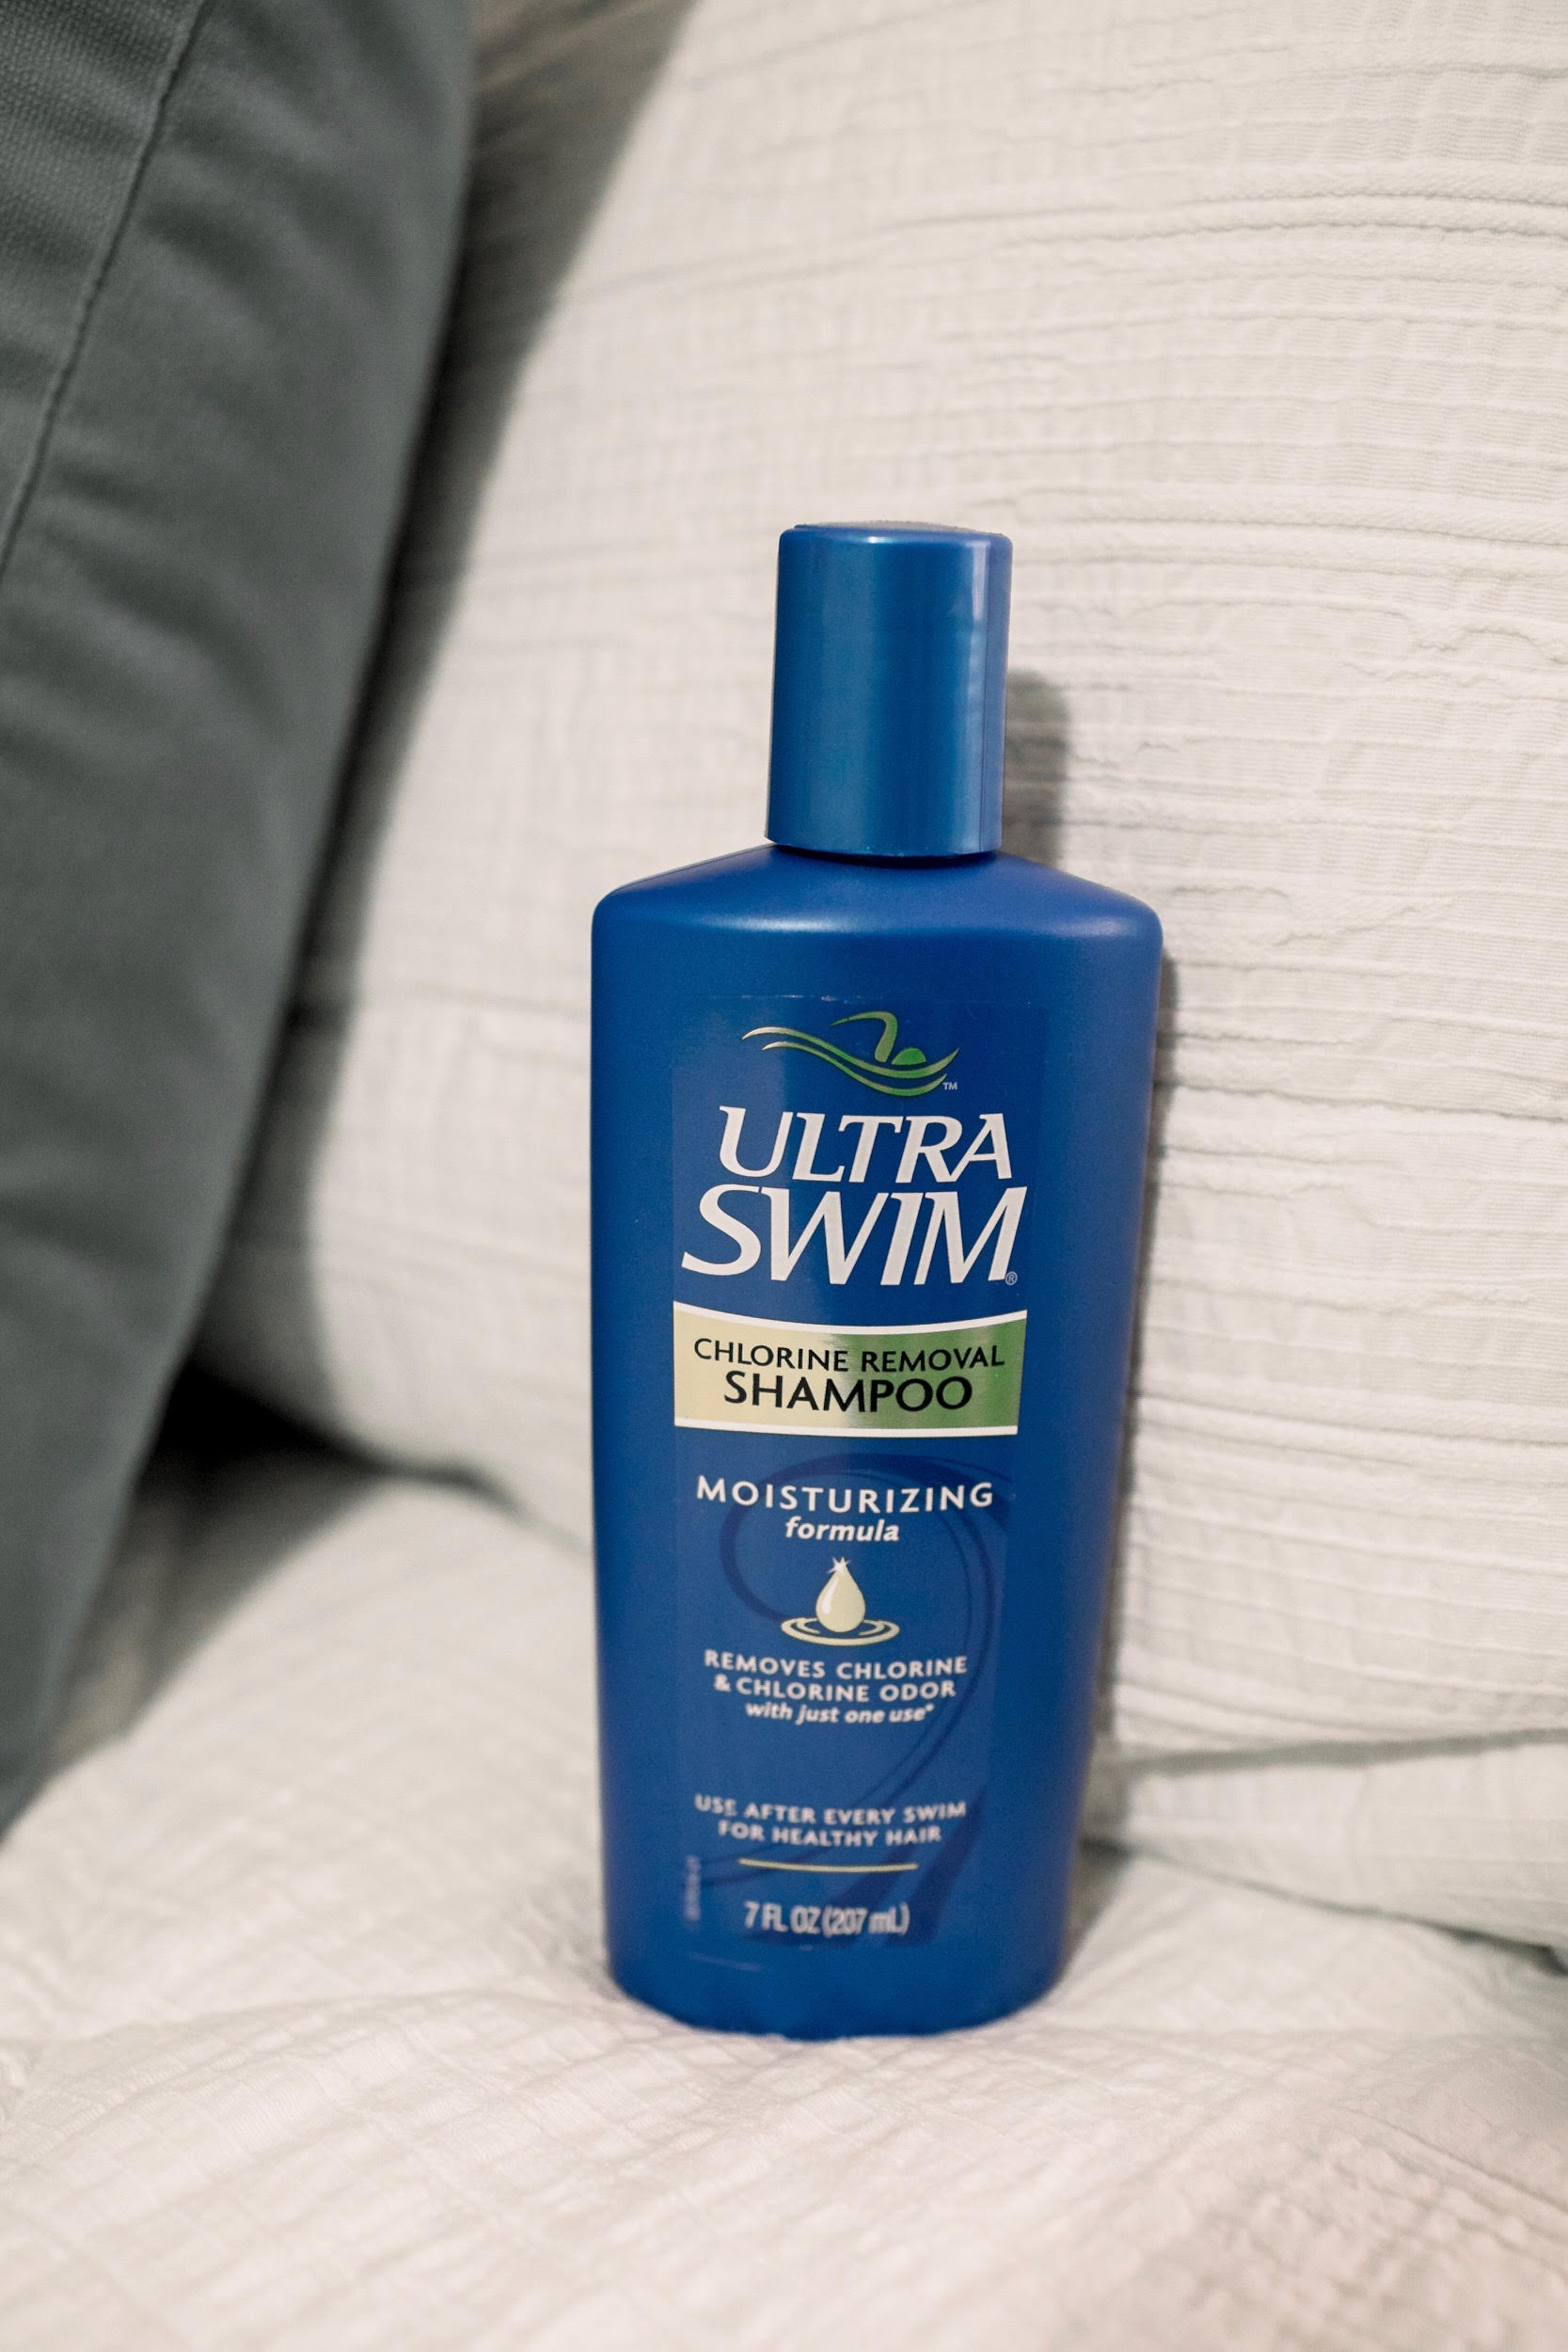 4 Summer Essentials found at Babbleboxx, featured by top US life and style blog, Walking in Memphis in High Heels: image of ultra swim chlorine shampoo